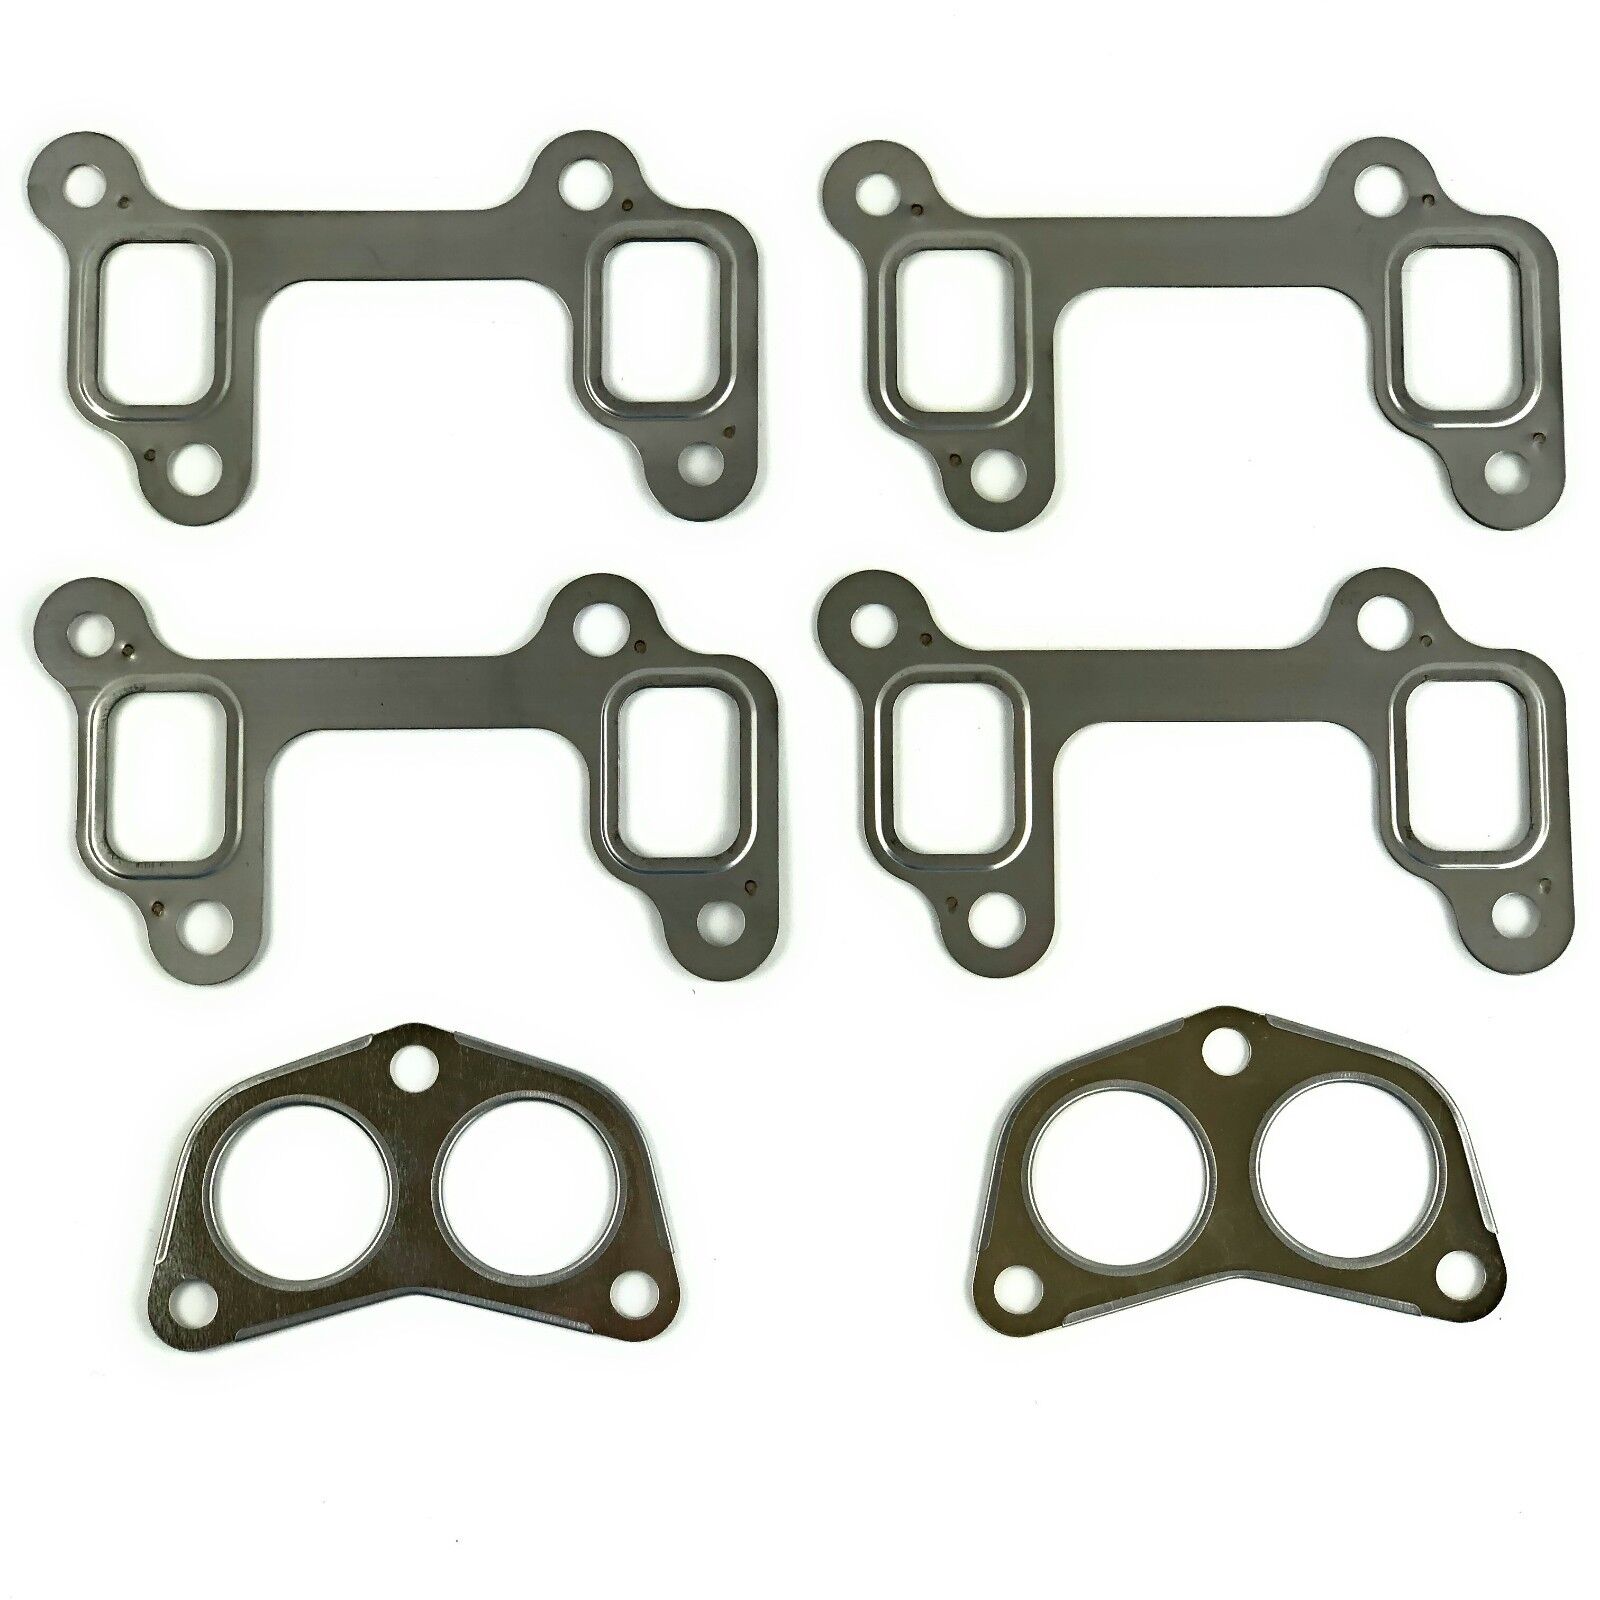 87-95 Range Rover Classic Engine Exhaust Manifold Pipe Gaskets Set Allmakes 4x4